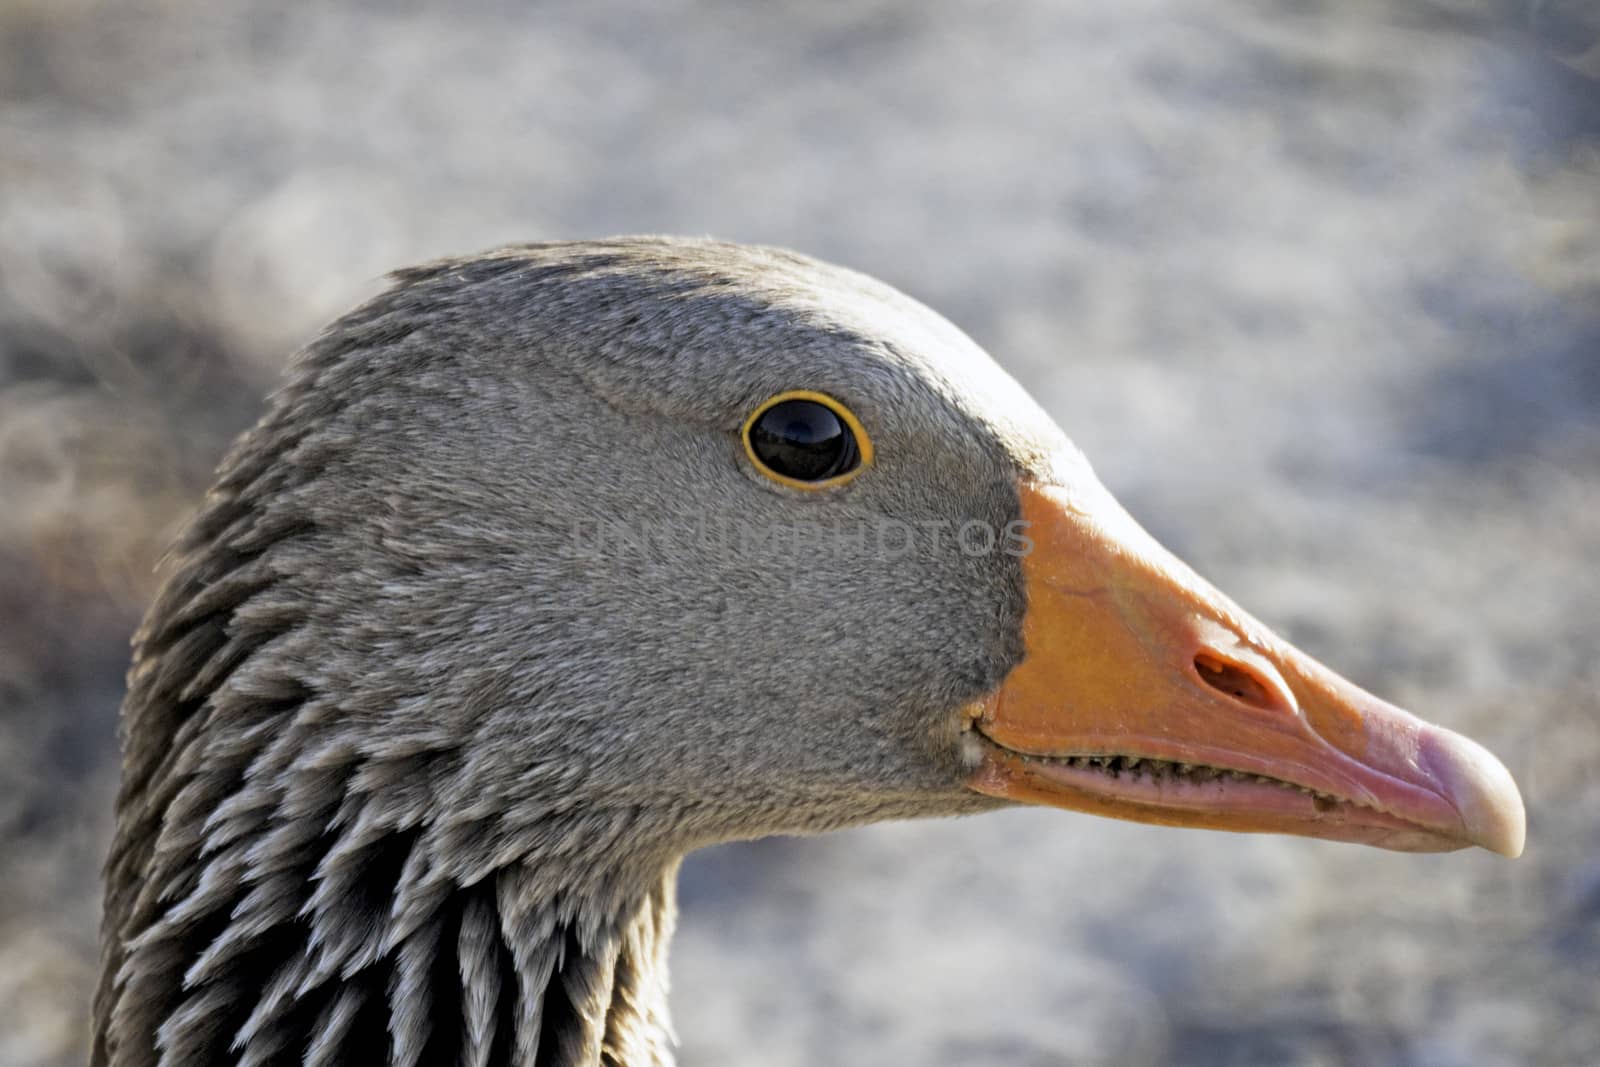  Greylag Goose by thomas_males